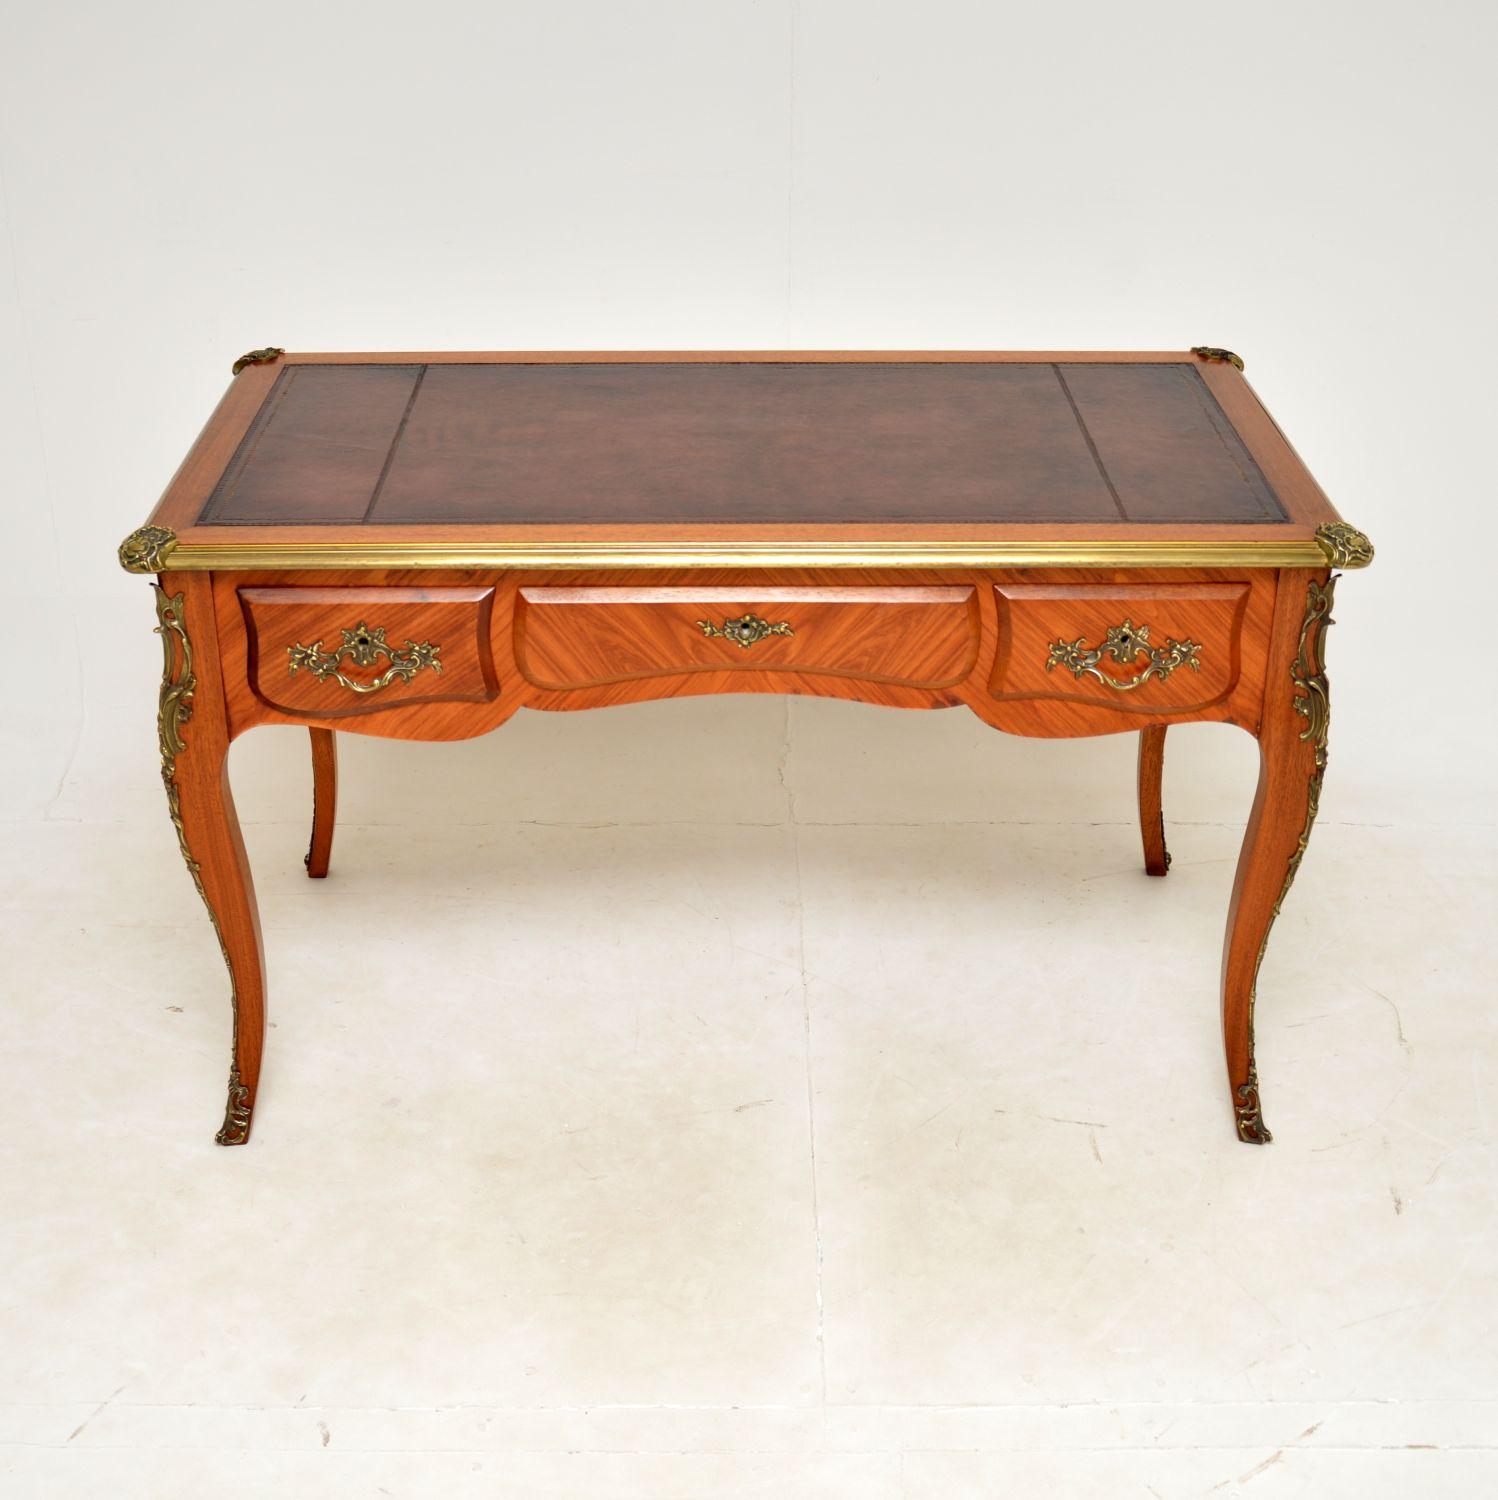 A stunning antique French leather top desk. This was made in France, it dates from around the 1950’s.

The quality is outstanding, this is a great size, with lots of nice features. The burgundy leather top is hand coloured and gold tooled, in